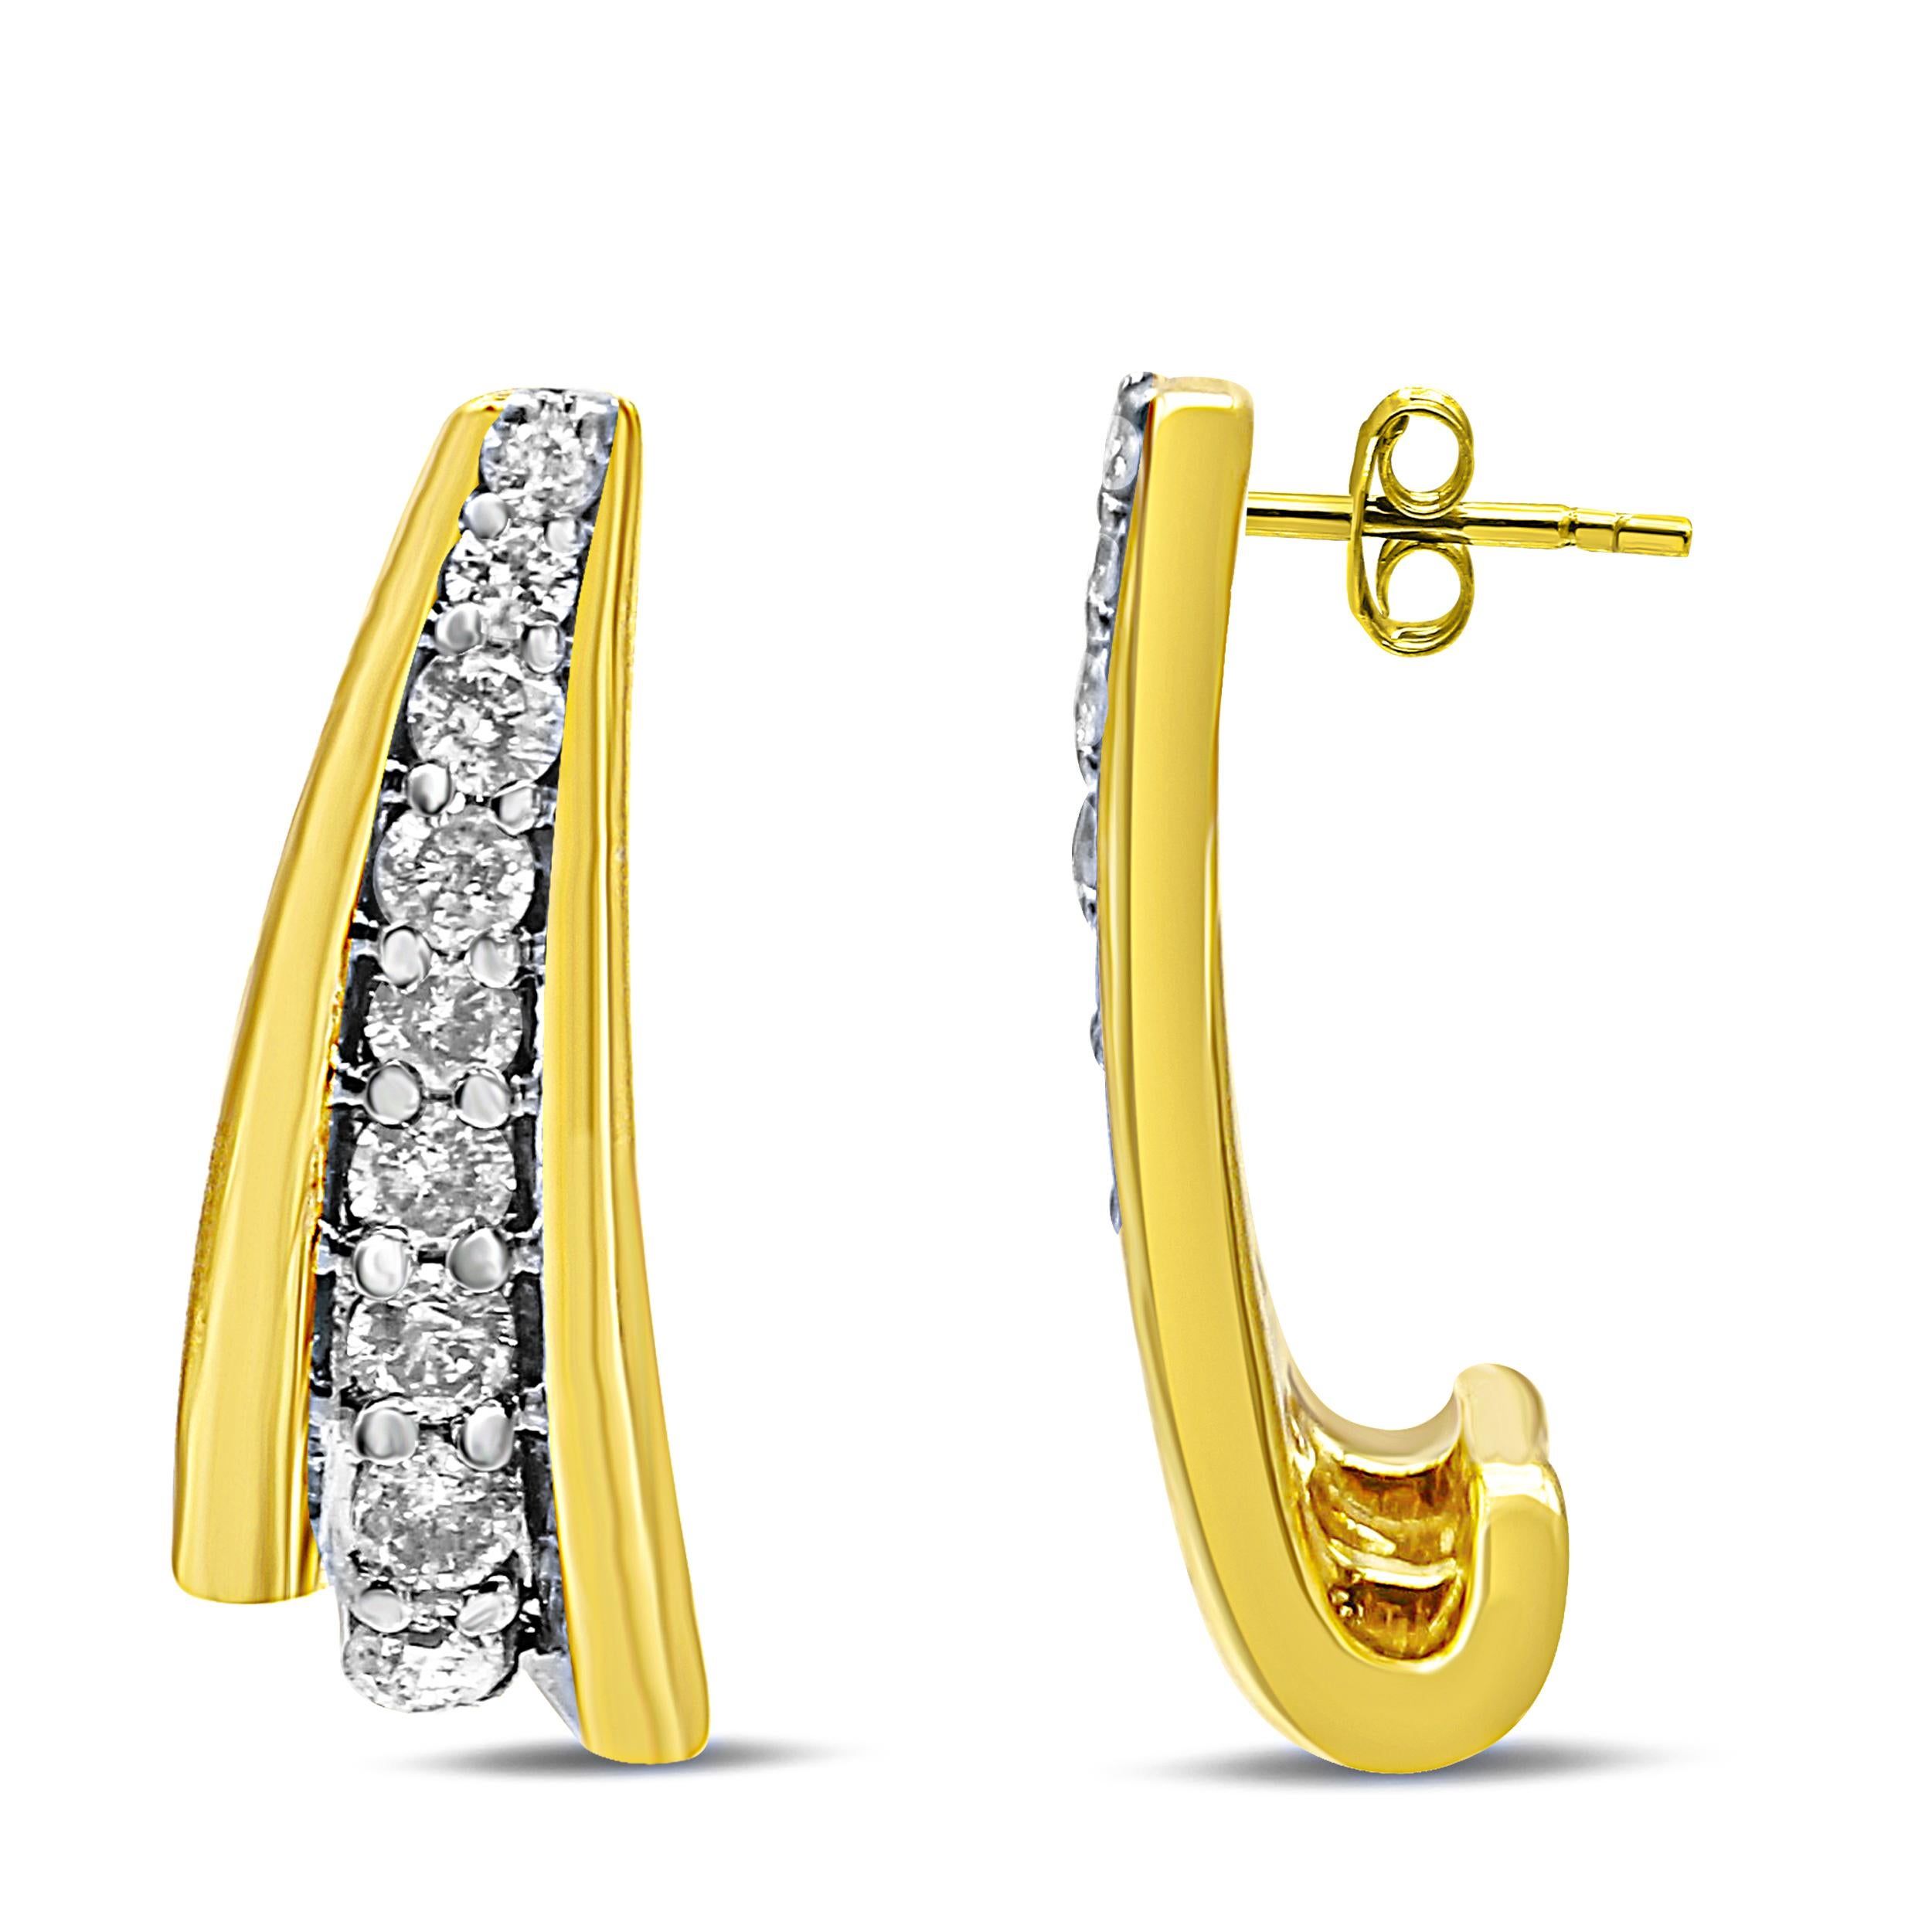 Contemporary 10K Yellow Gold Plated Sterling Silver 1.0 Carat Diamond Huggie Earrings For Sale